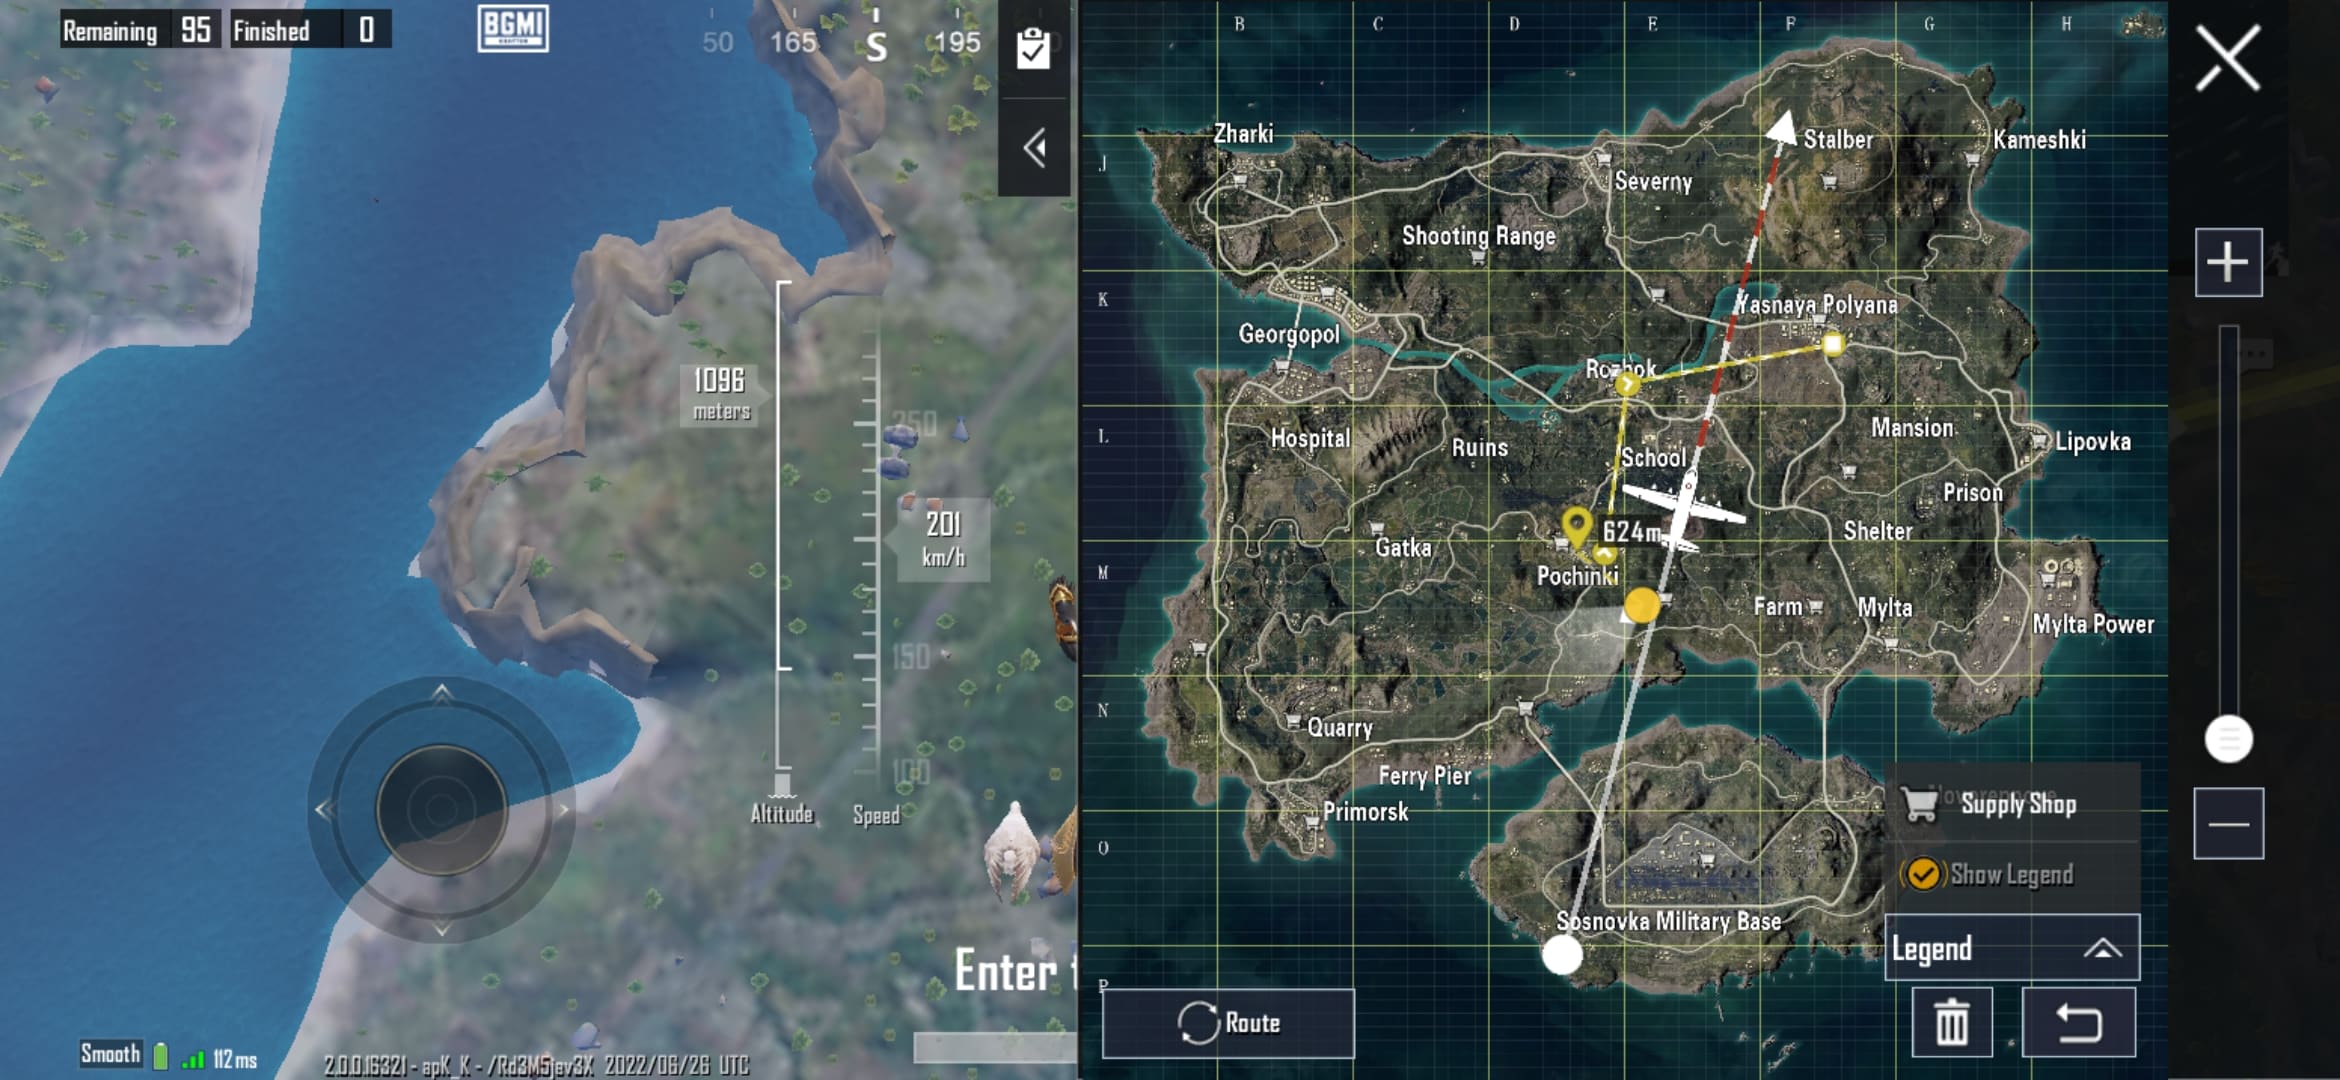 Tips to improve map awareness in BGMI mobile